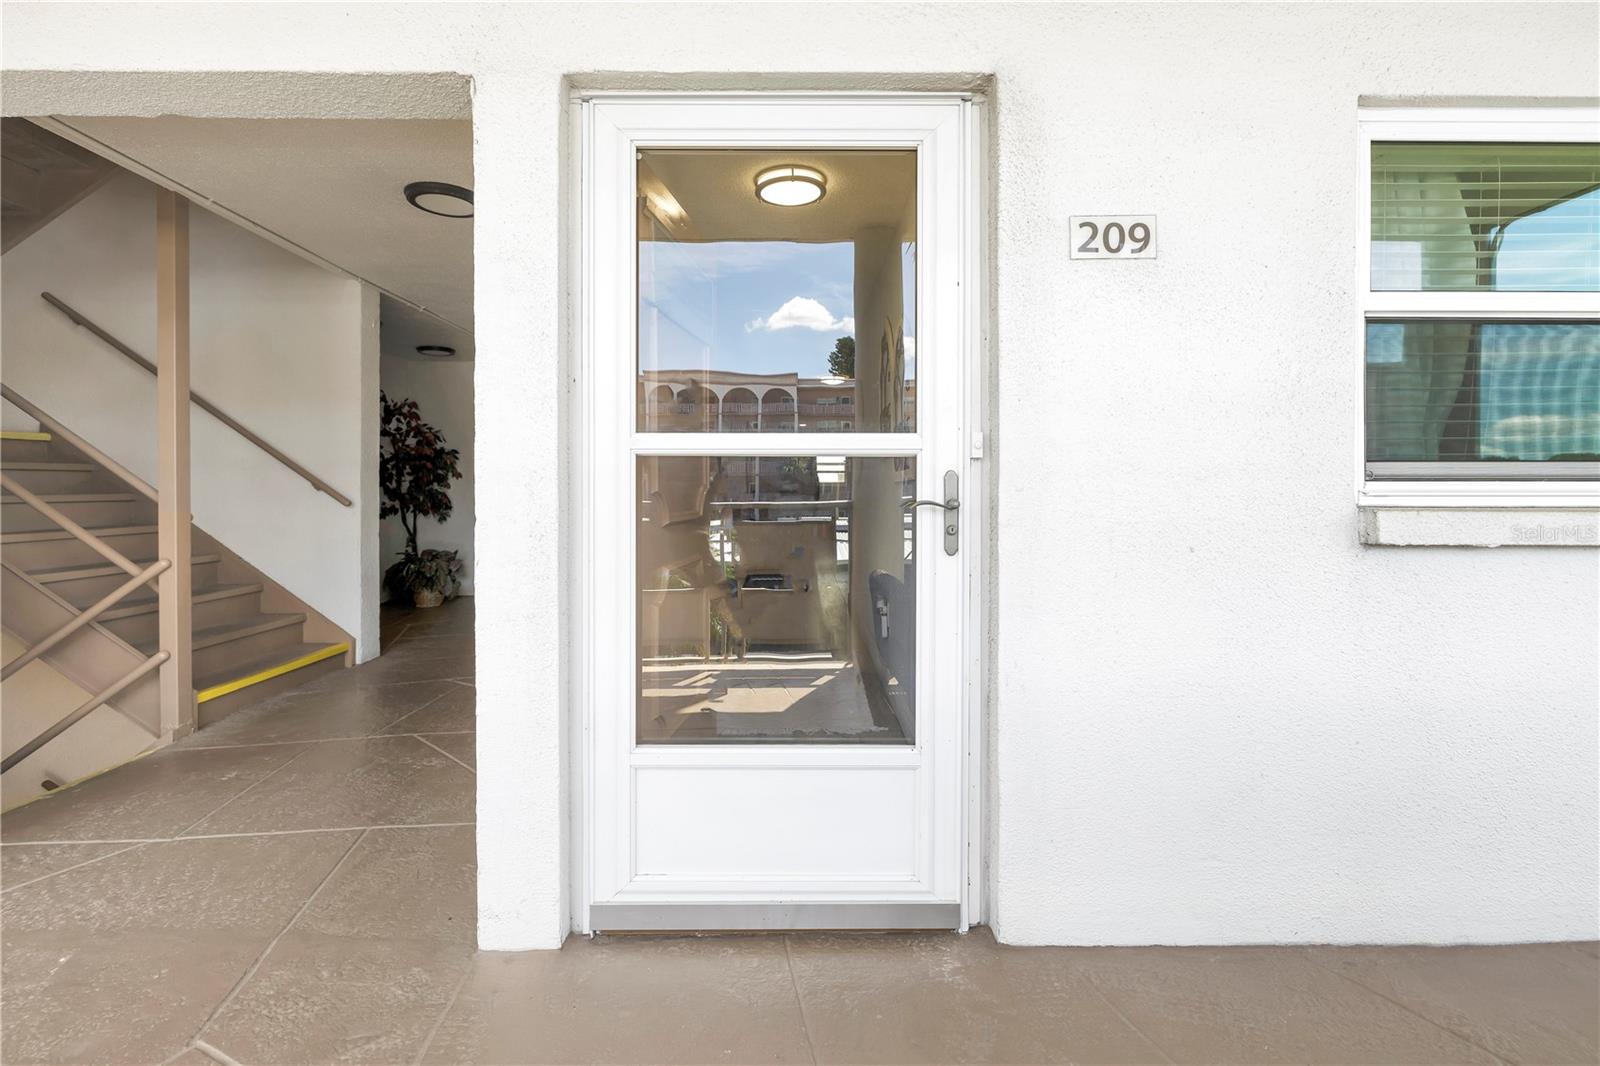 Unit conveniently located right by stairs, elevator, and laundry room